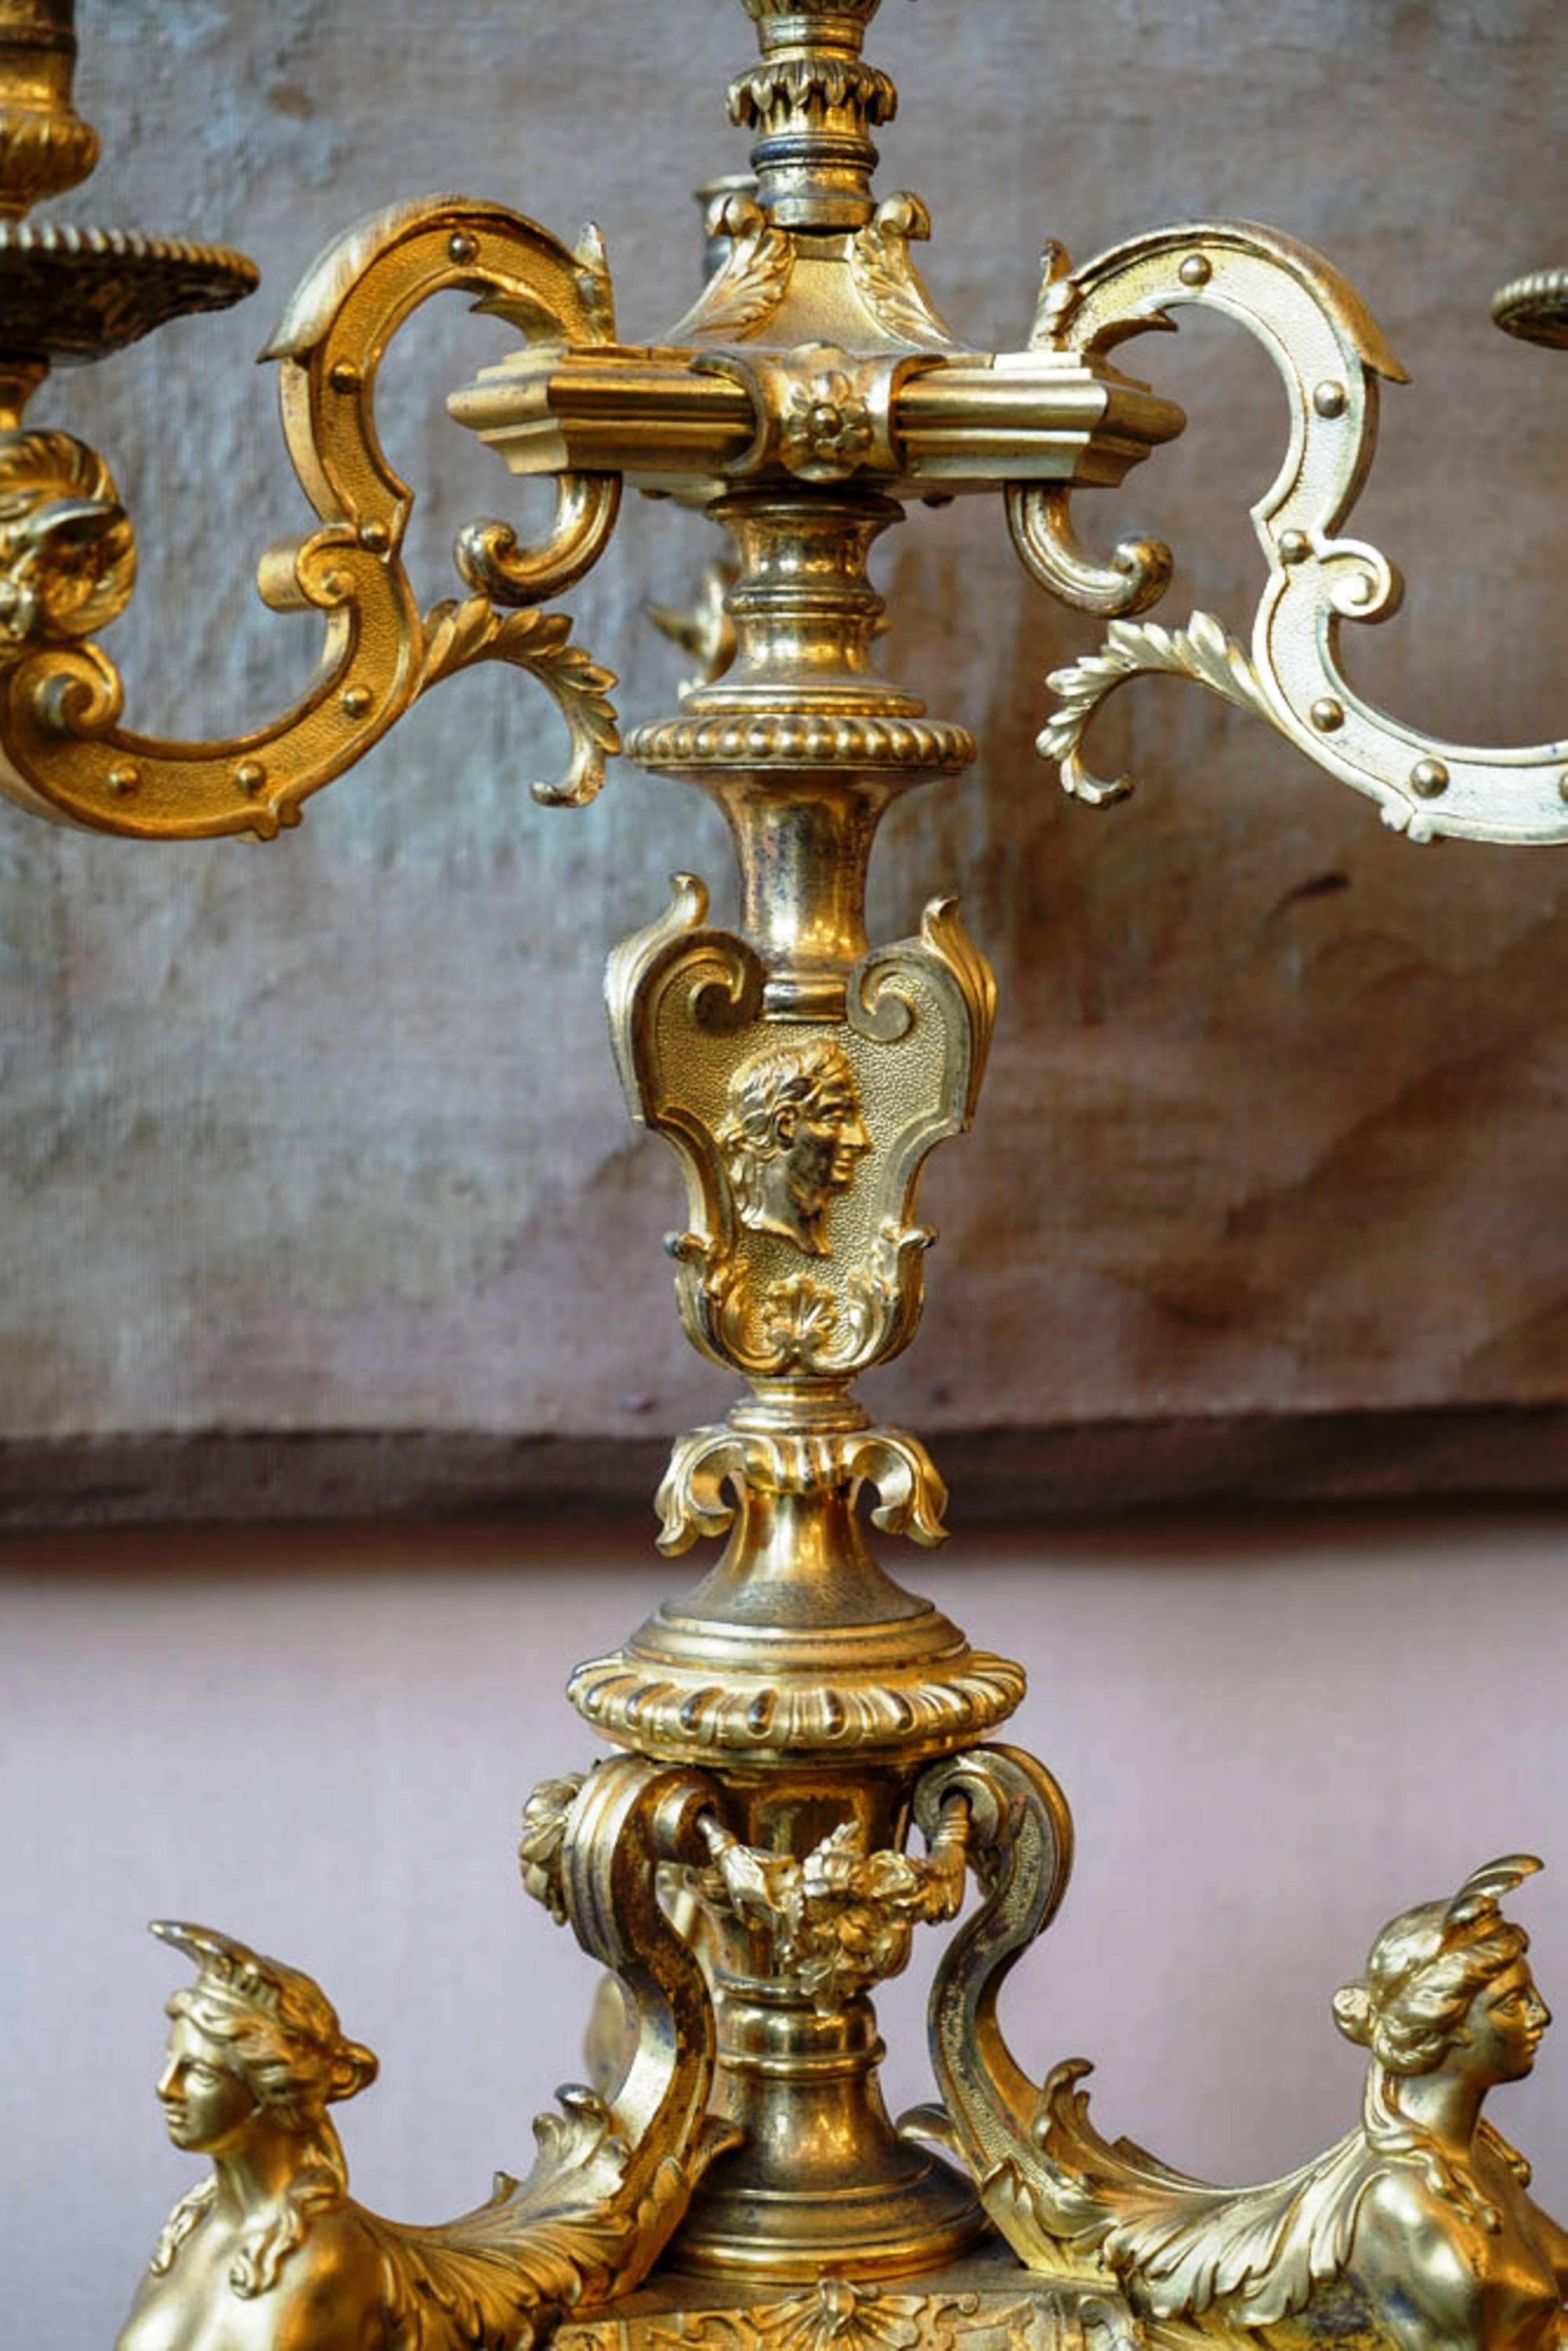 Splendid Pair of Candelabras, Gilt-Bronze, Louis XIV Style, France, circa 1880 In Excellent Condition For Sale In Saint-Ouen, FR